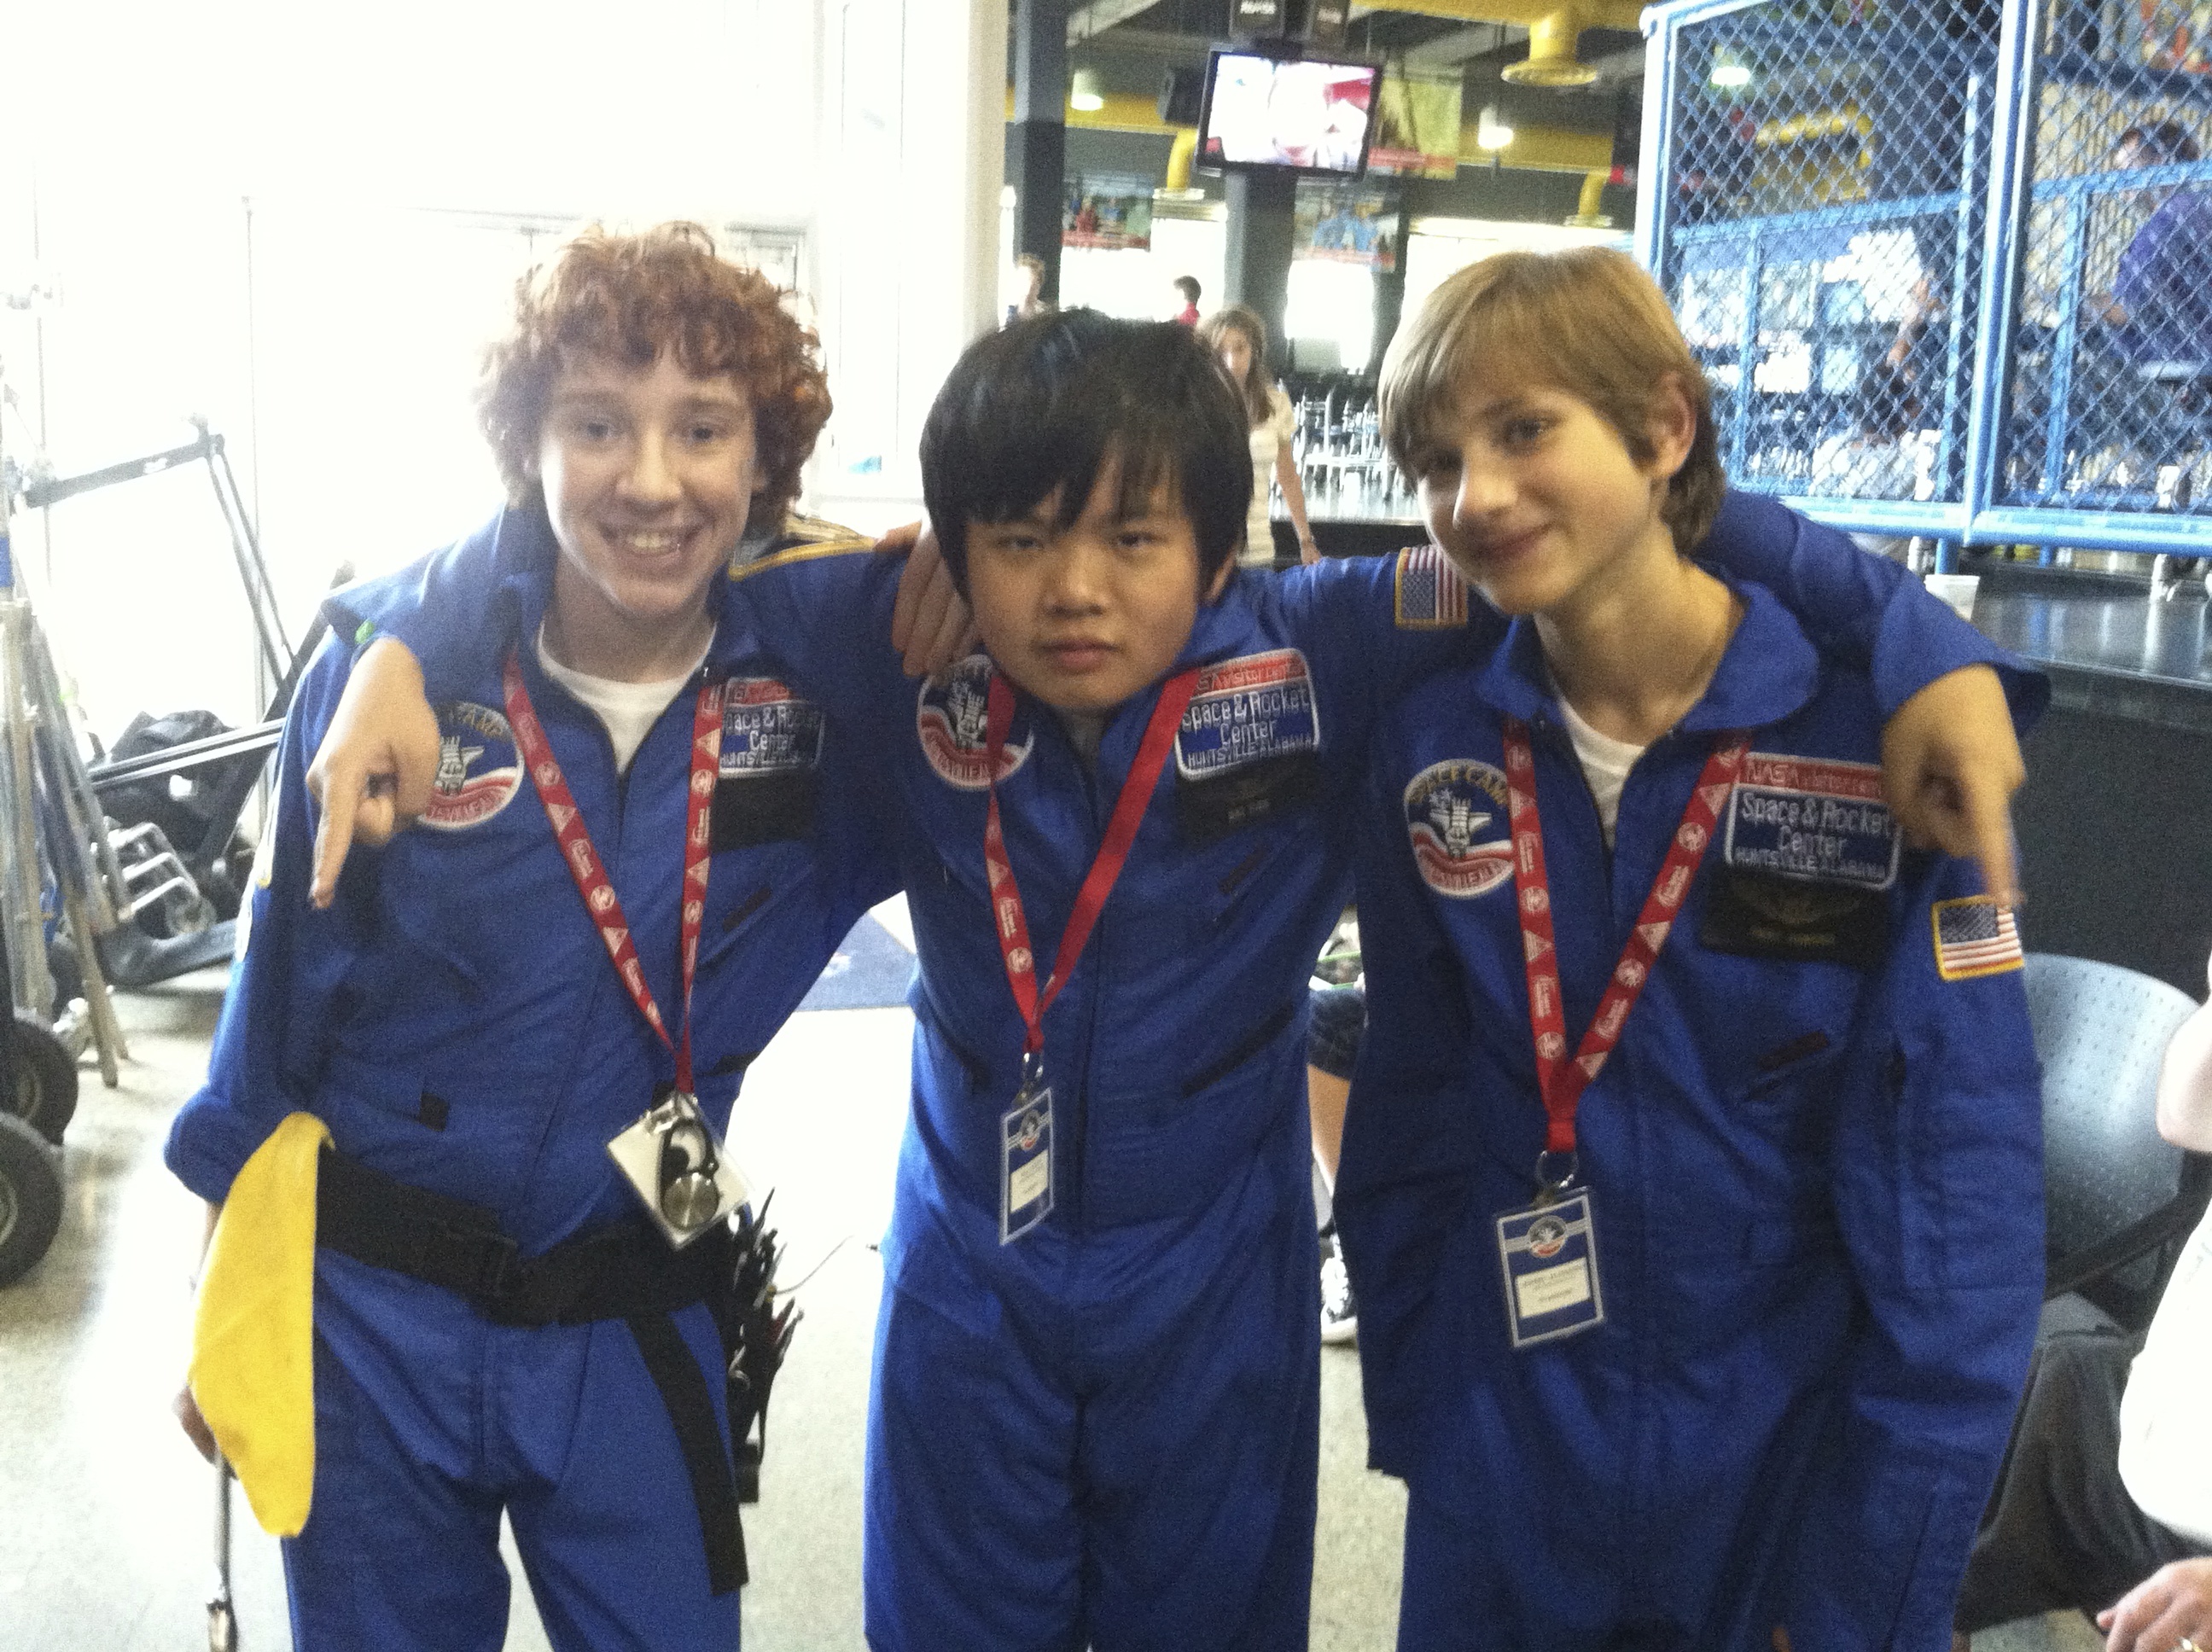 Still Michael Zhang (The Avengers) is on set (Space Warriors)with Thomas Horn (Extremely Loud & Incredibly Close) and Grayson Russell (Diary of a Wimpy Kid)